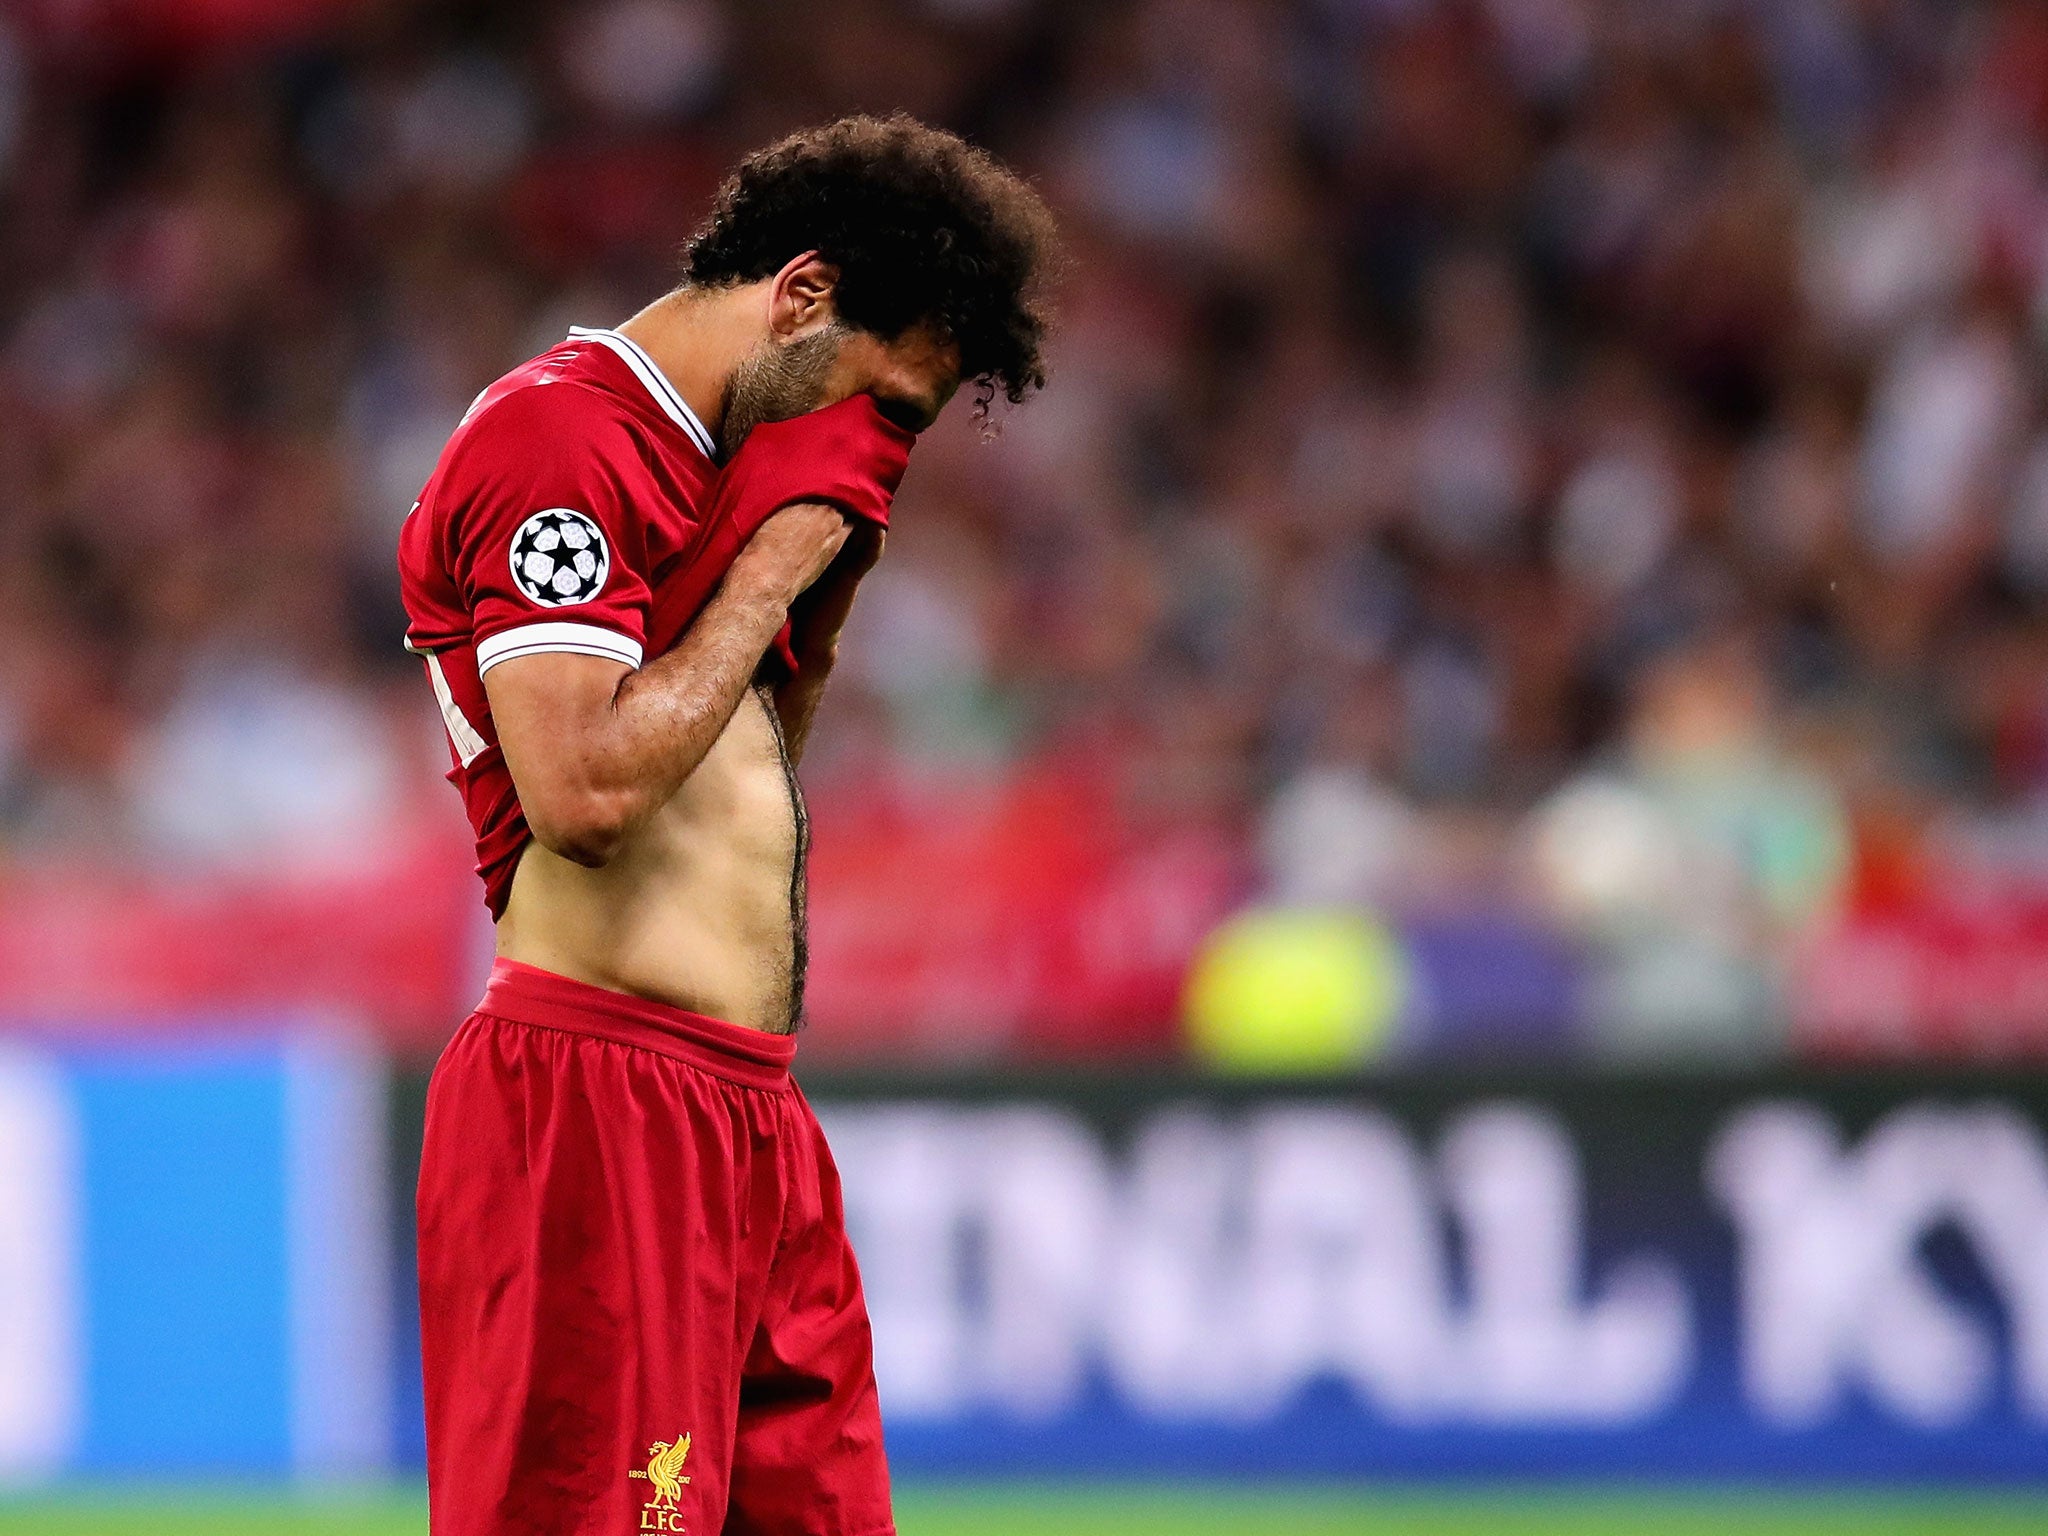 Moahmed Salah's injury changed everything for Liverpool